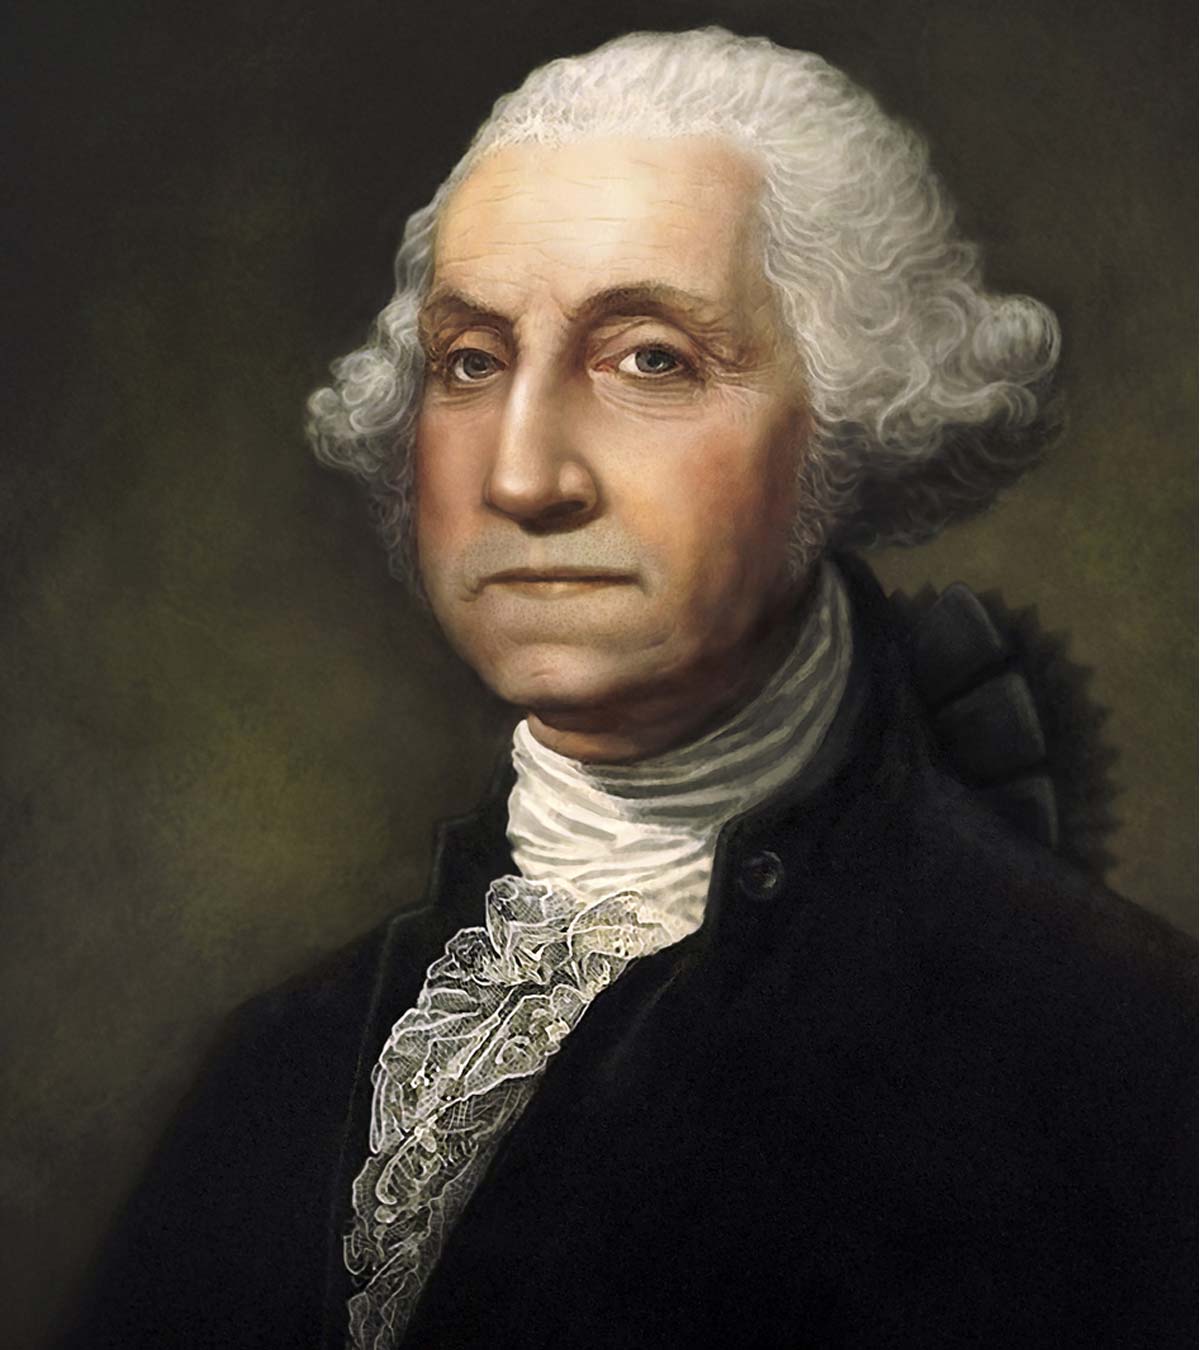 32 Interesting George Washington Facts For Kids To Know